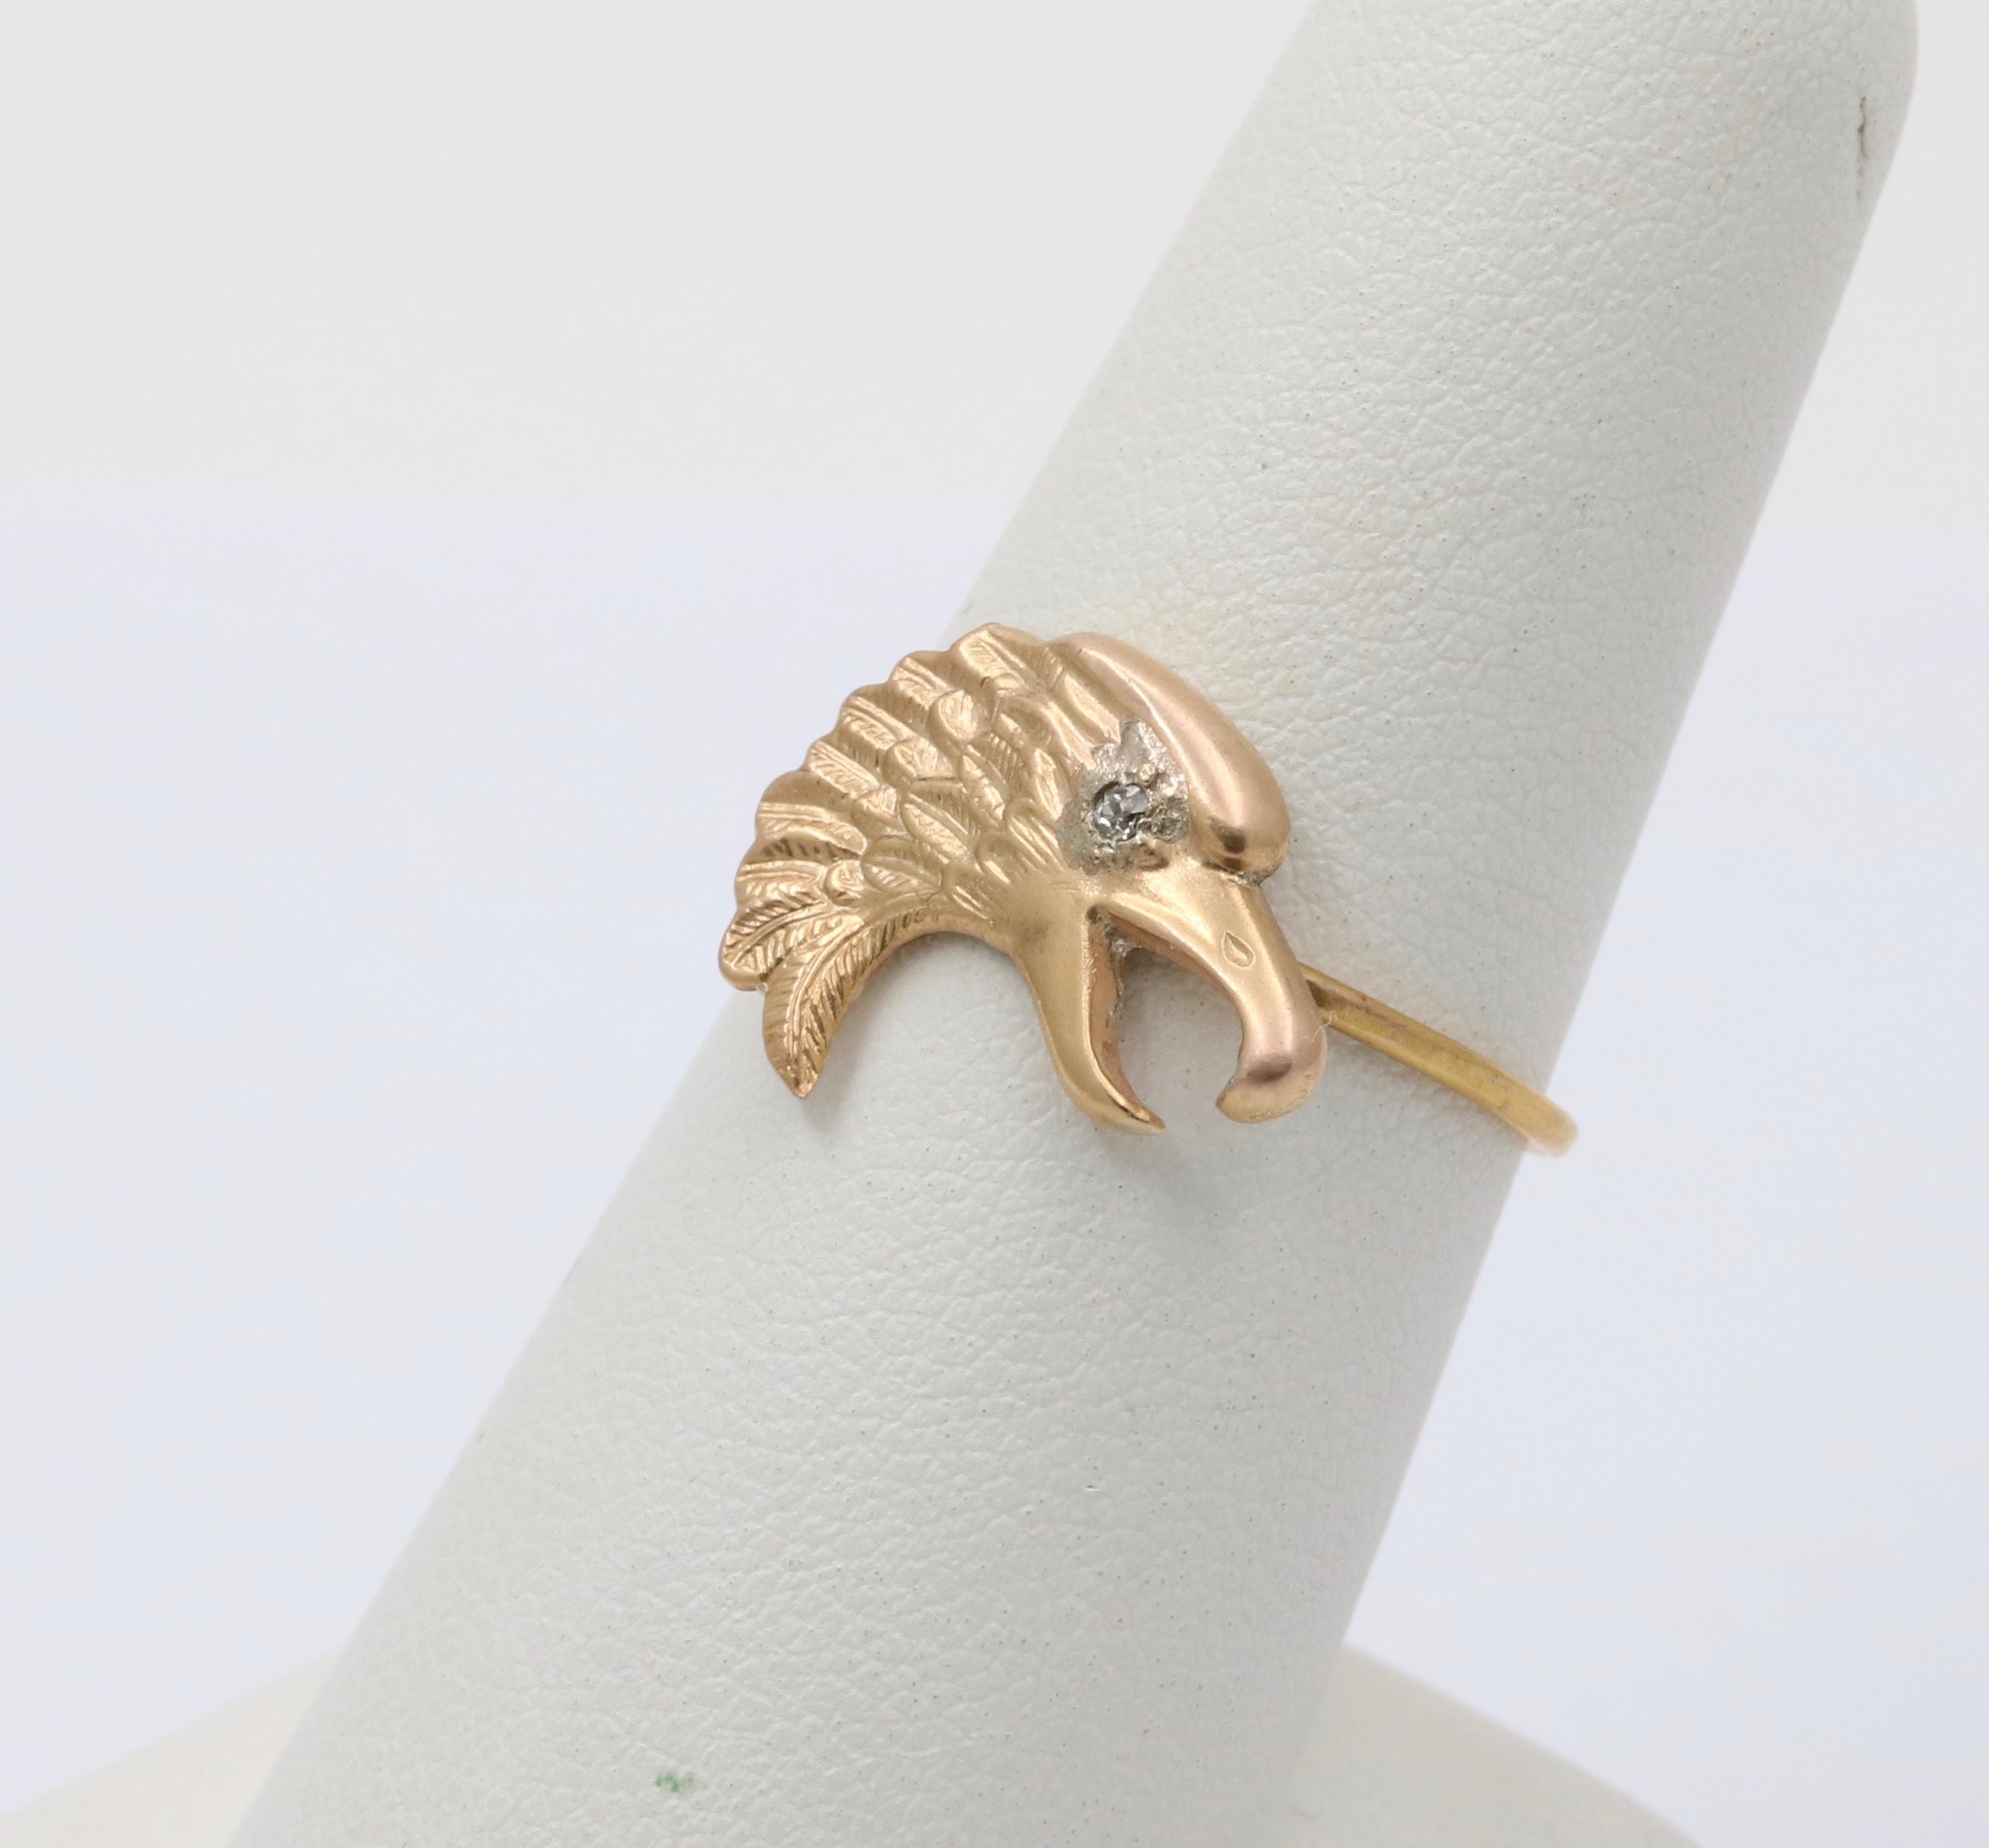 Buy 1996 $5 22k Gold American Eagle Coin in Eagle Ring 14k Gold Online |  Arnold Jewelers